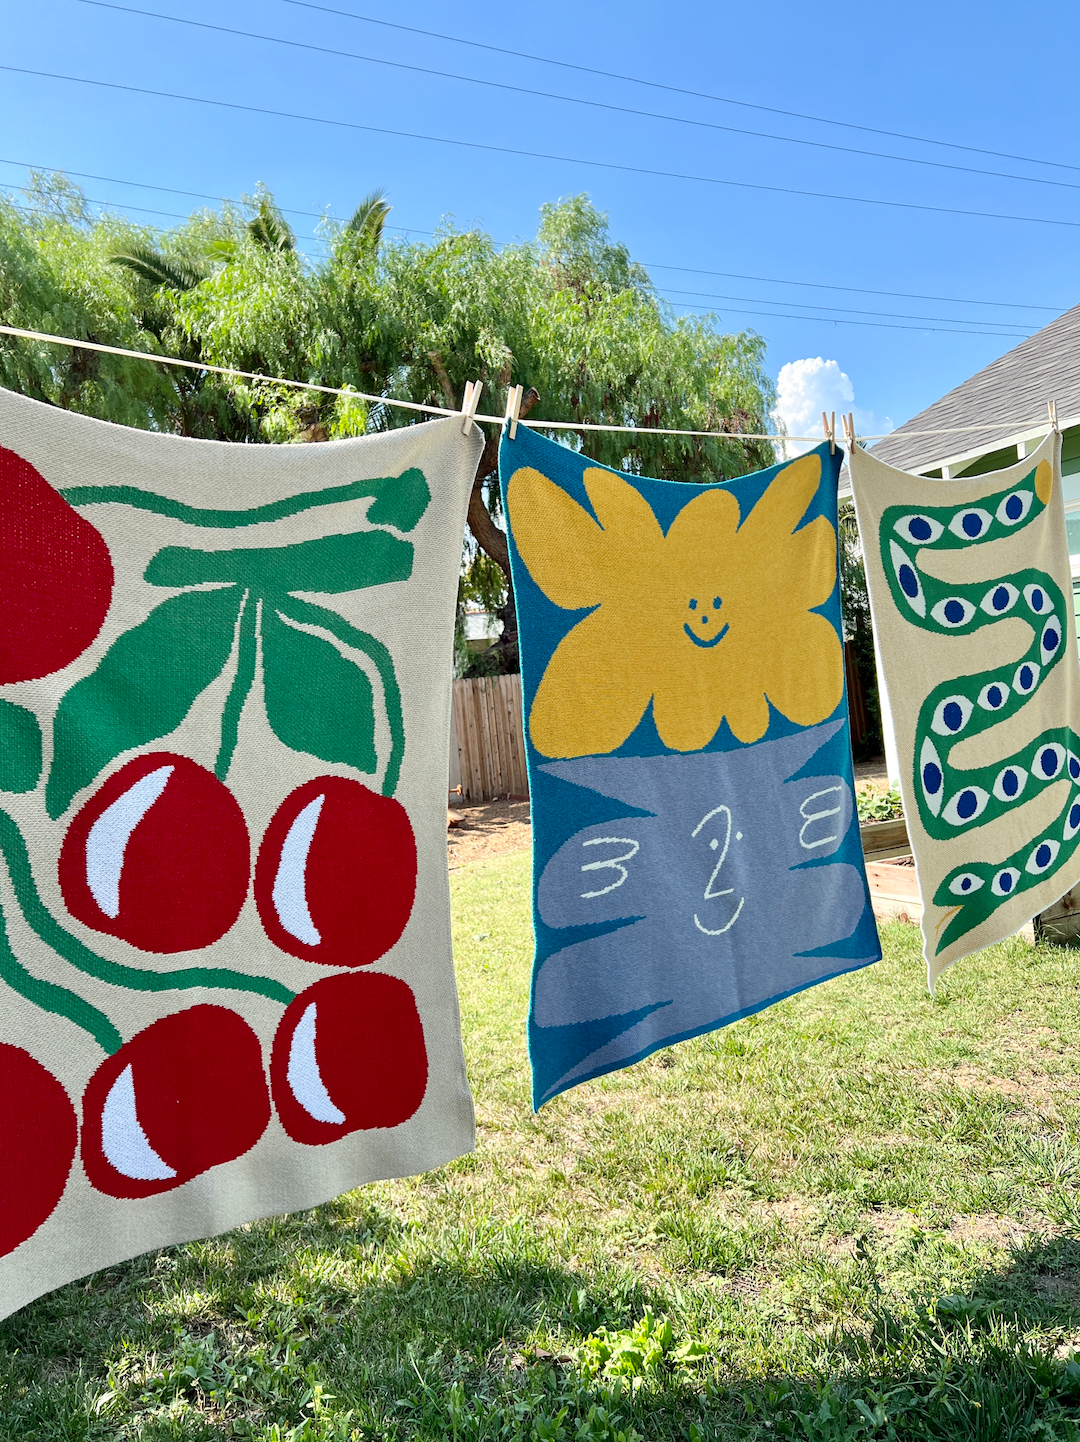 Three mini blankets on a washing line: one with red cherries and green leaves on an ecru background, one with yellow and gray smiley shapes on a sky blue background, one with a green snake with blue eye patterns curling down an ecru background